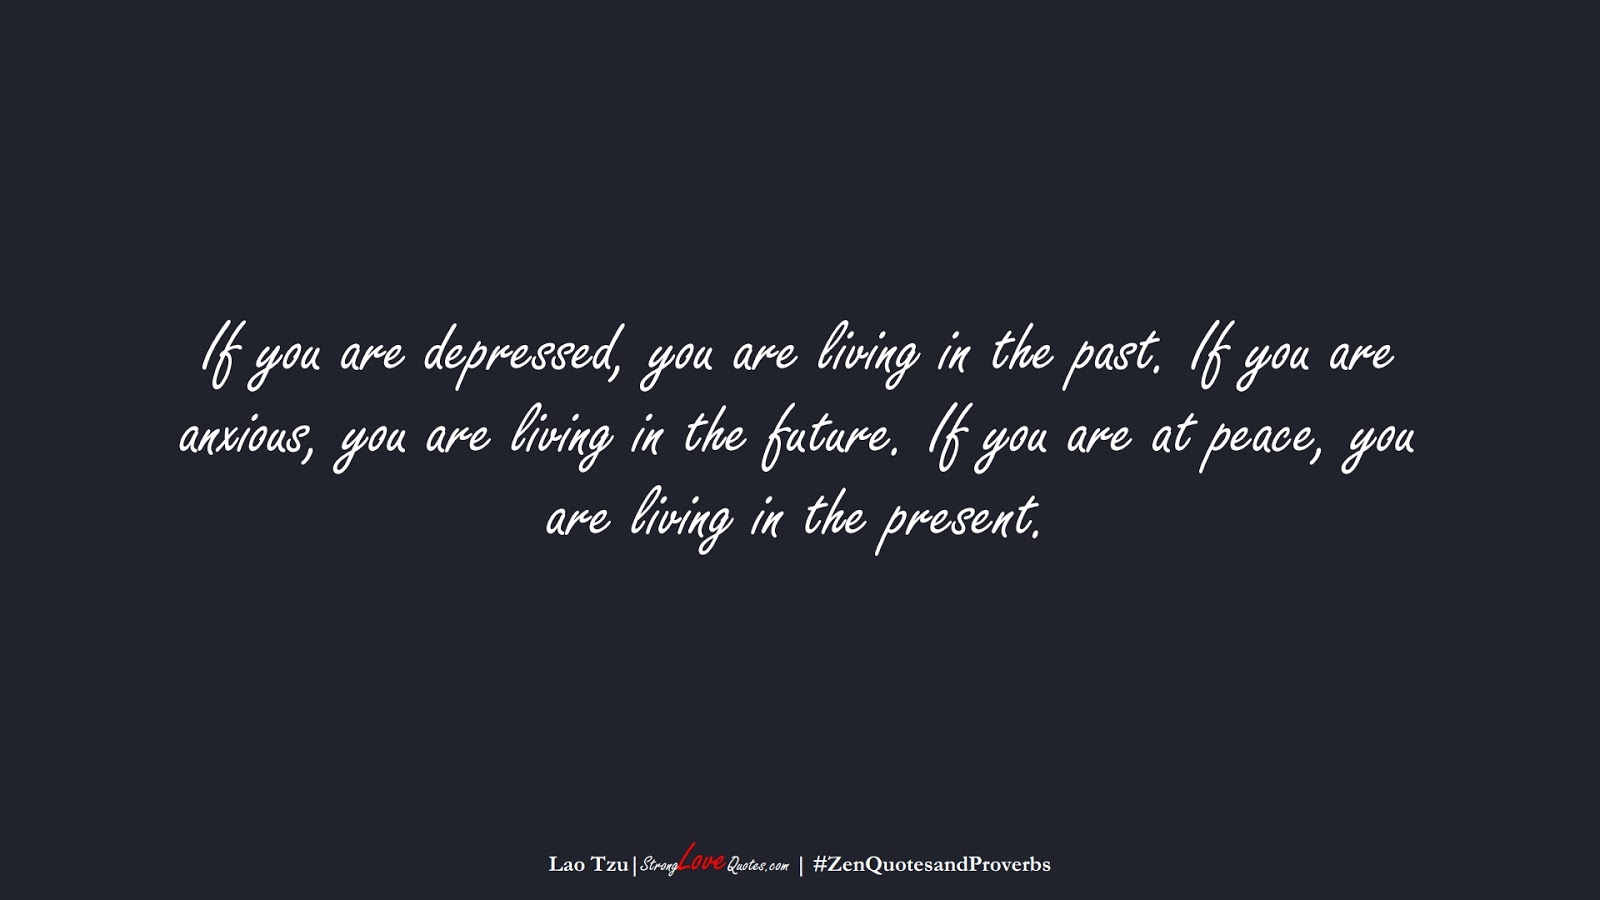 If you are depressed, you are living in the past. If you are anxious, you are living in the future. If you are at peace, you are living in the present. (Lao Tzu);  #ZenQuotesandProverbs